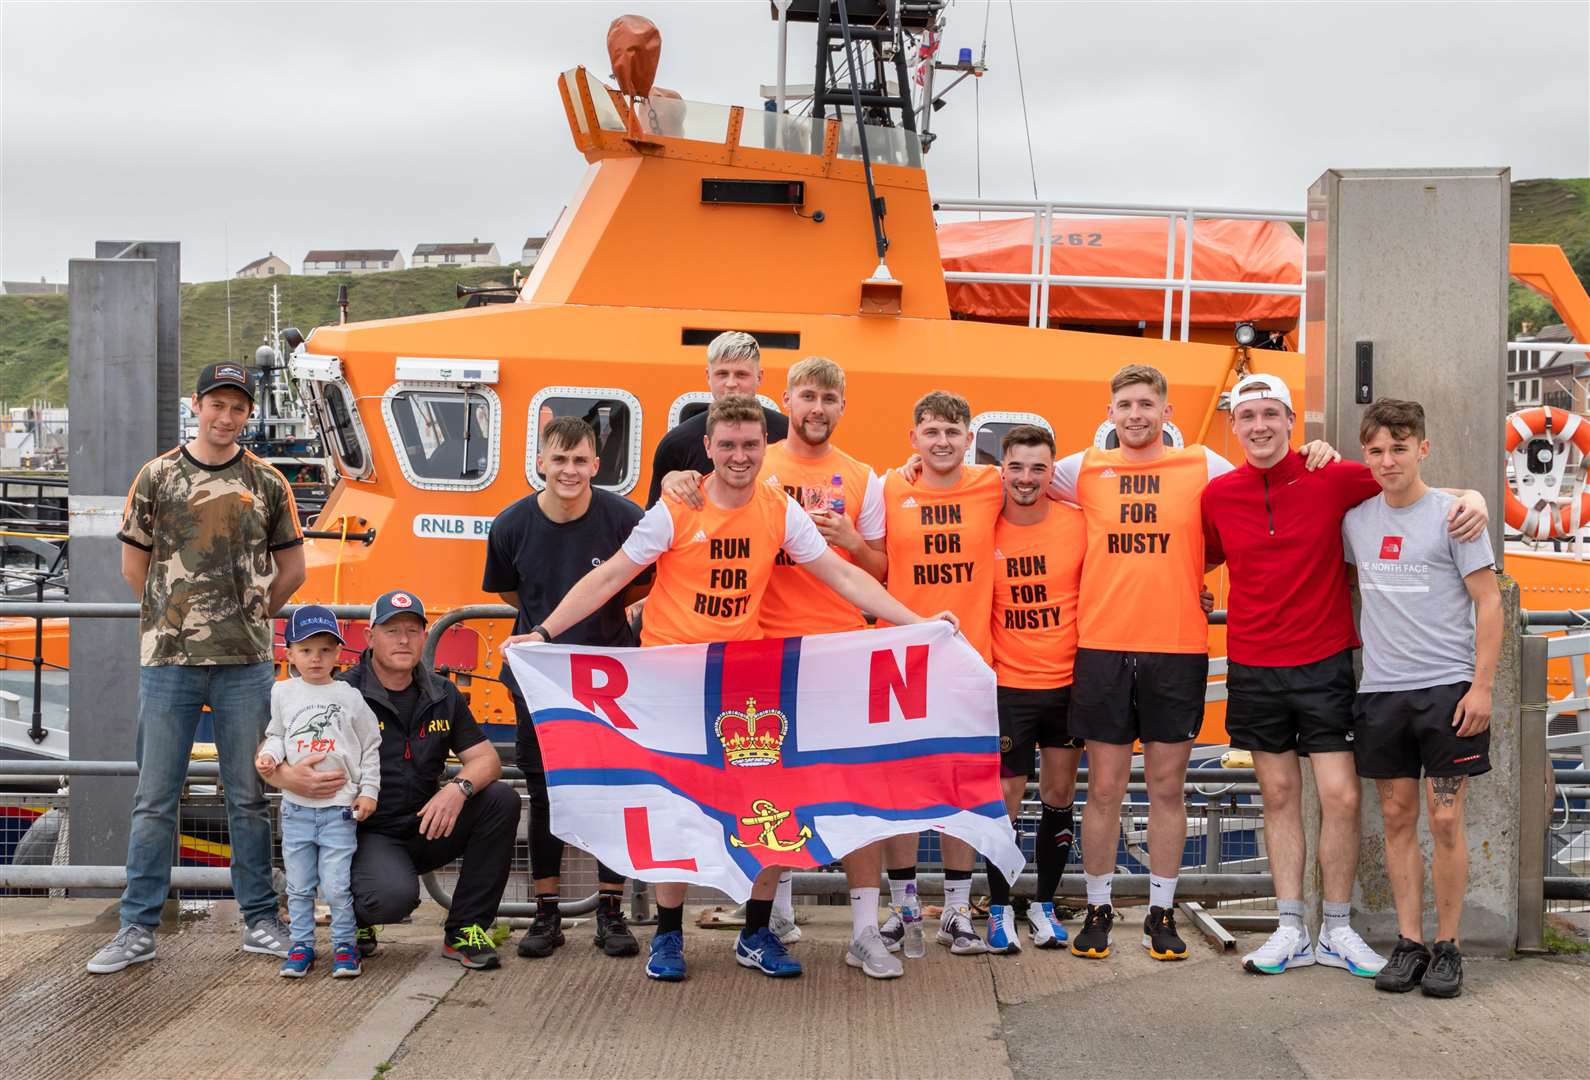 Friends of Thurso lifeboat volunteer Ryan Davidson (known as Rusty), who lost his life earlier in the year, raised more than £8500 in his memory after running from Wick to Scrabster. Picture: Karen Munro